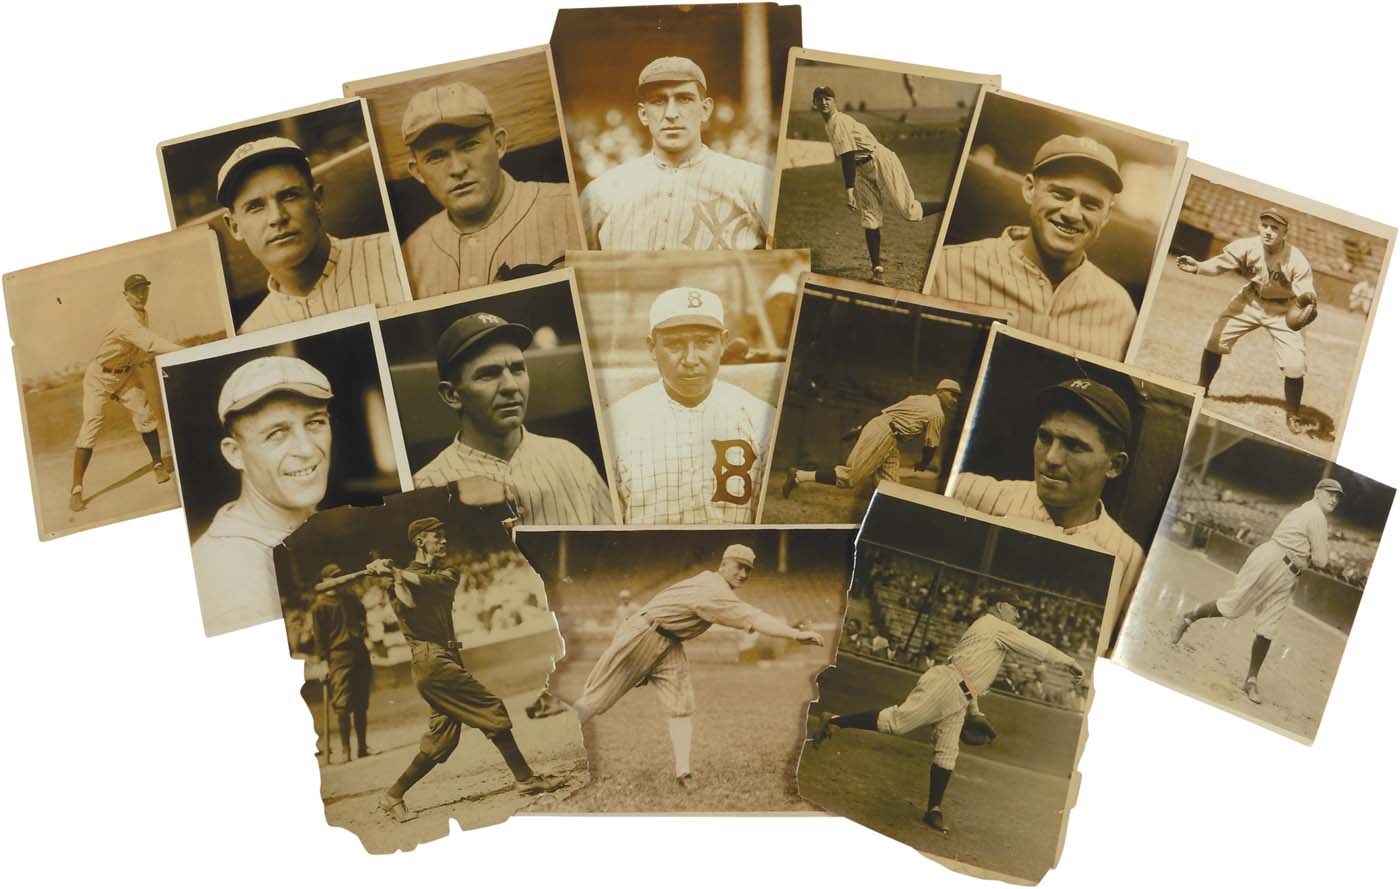 - 1910s-20s Vintage Baseball Photograph Collection from NY Sports Editor Assistant (50+)